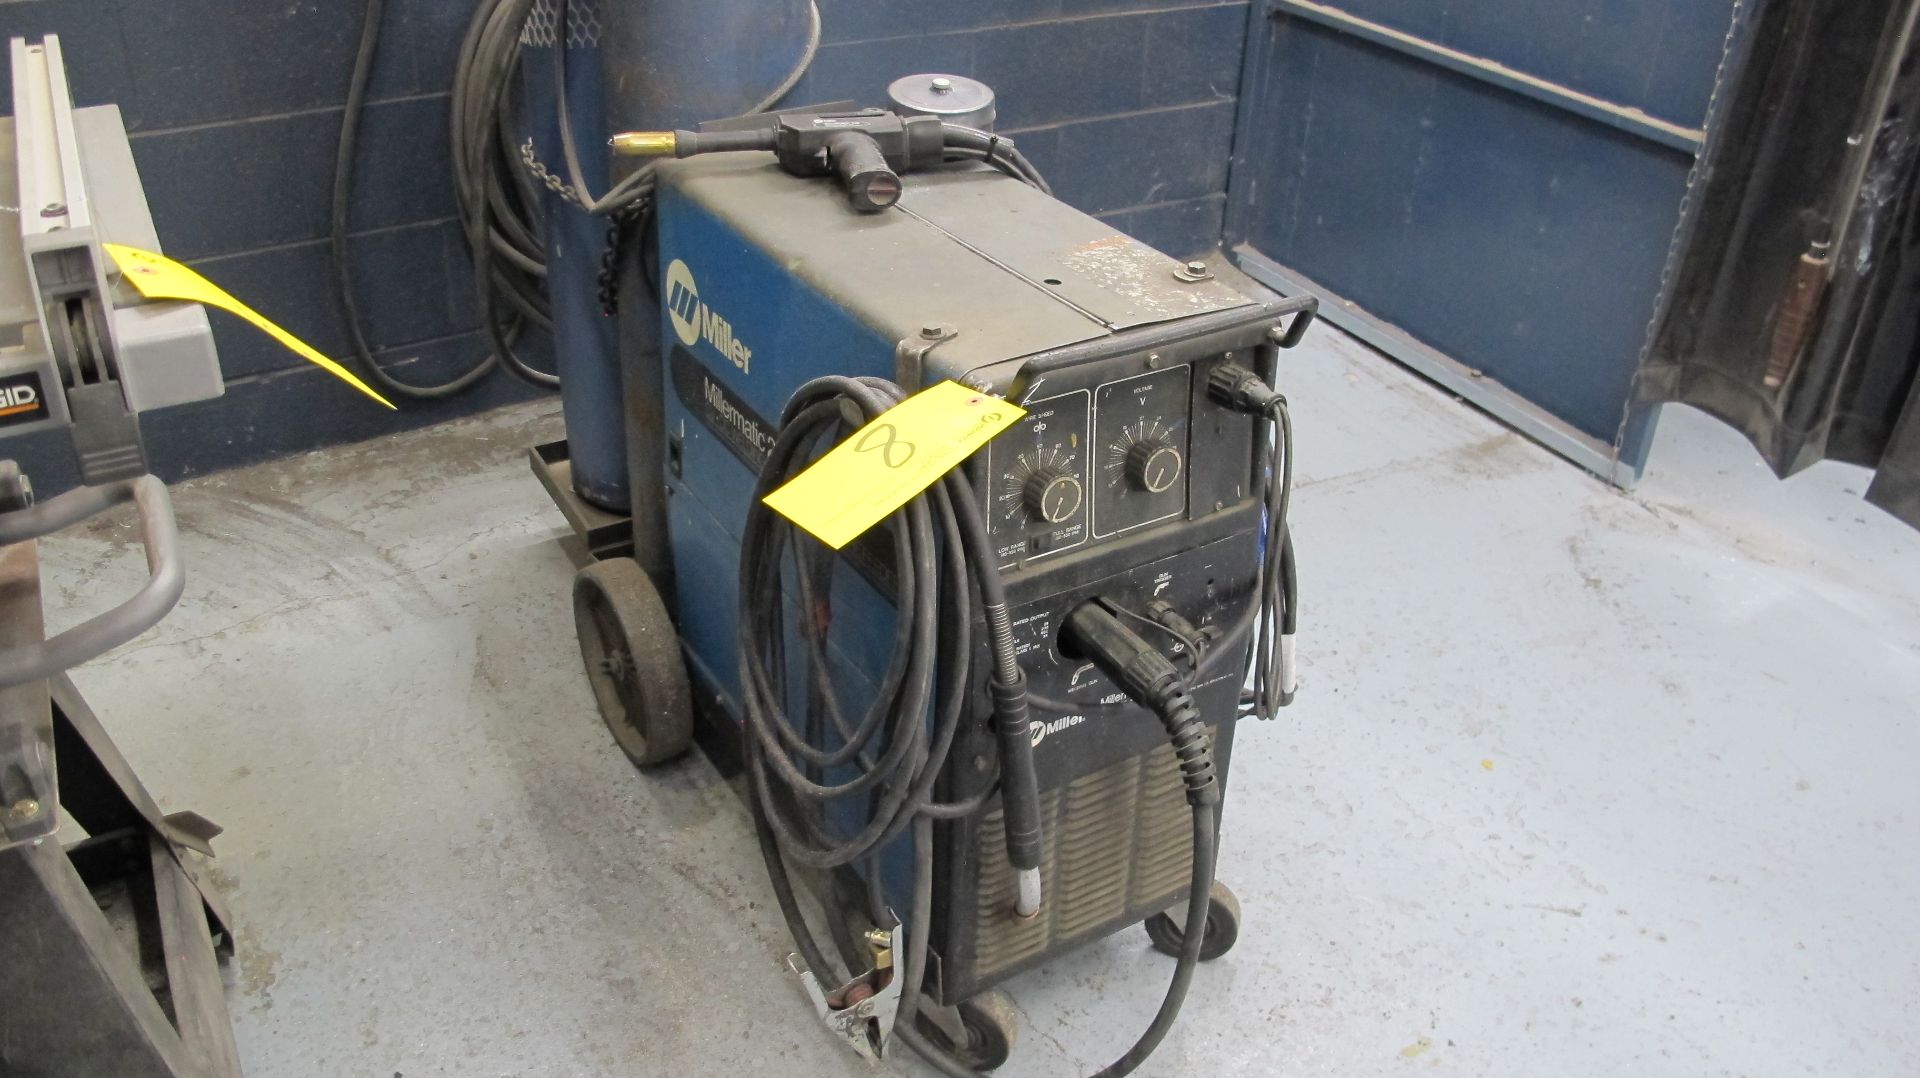 MILLER MILLERMATIC 250 CV-DC WELDING POWER SOURCE W/ MILLER SPOOLMATIC 15A WIRE FEEDER, CABLES AND - Image 2 of 6